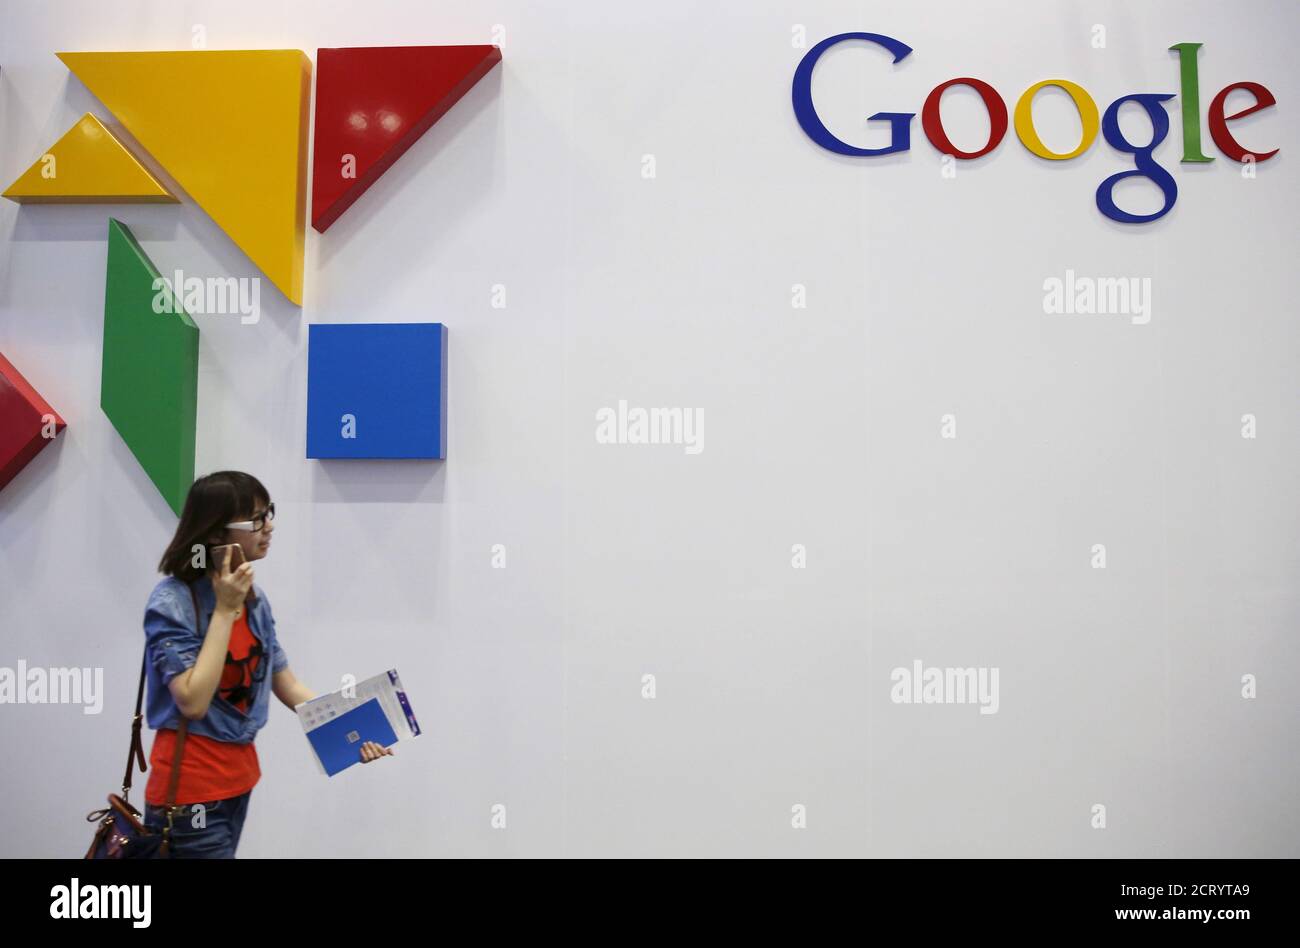 A woman walks past a logo of Google at the Global Mobile Internet Conference (GMIC) 2015 in Beijing, China, April 28, 2015. This logo has been updated and is no longer in use.  REUTERS/Kim Kyung-Hoon Stock Photo